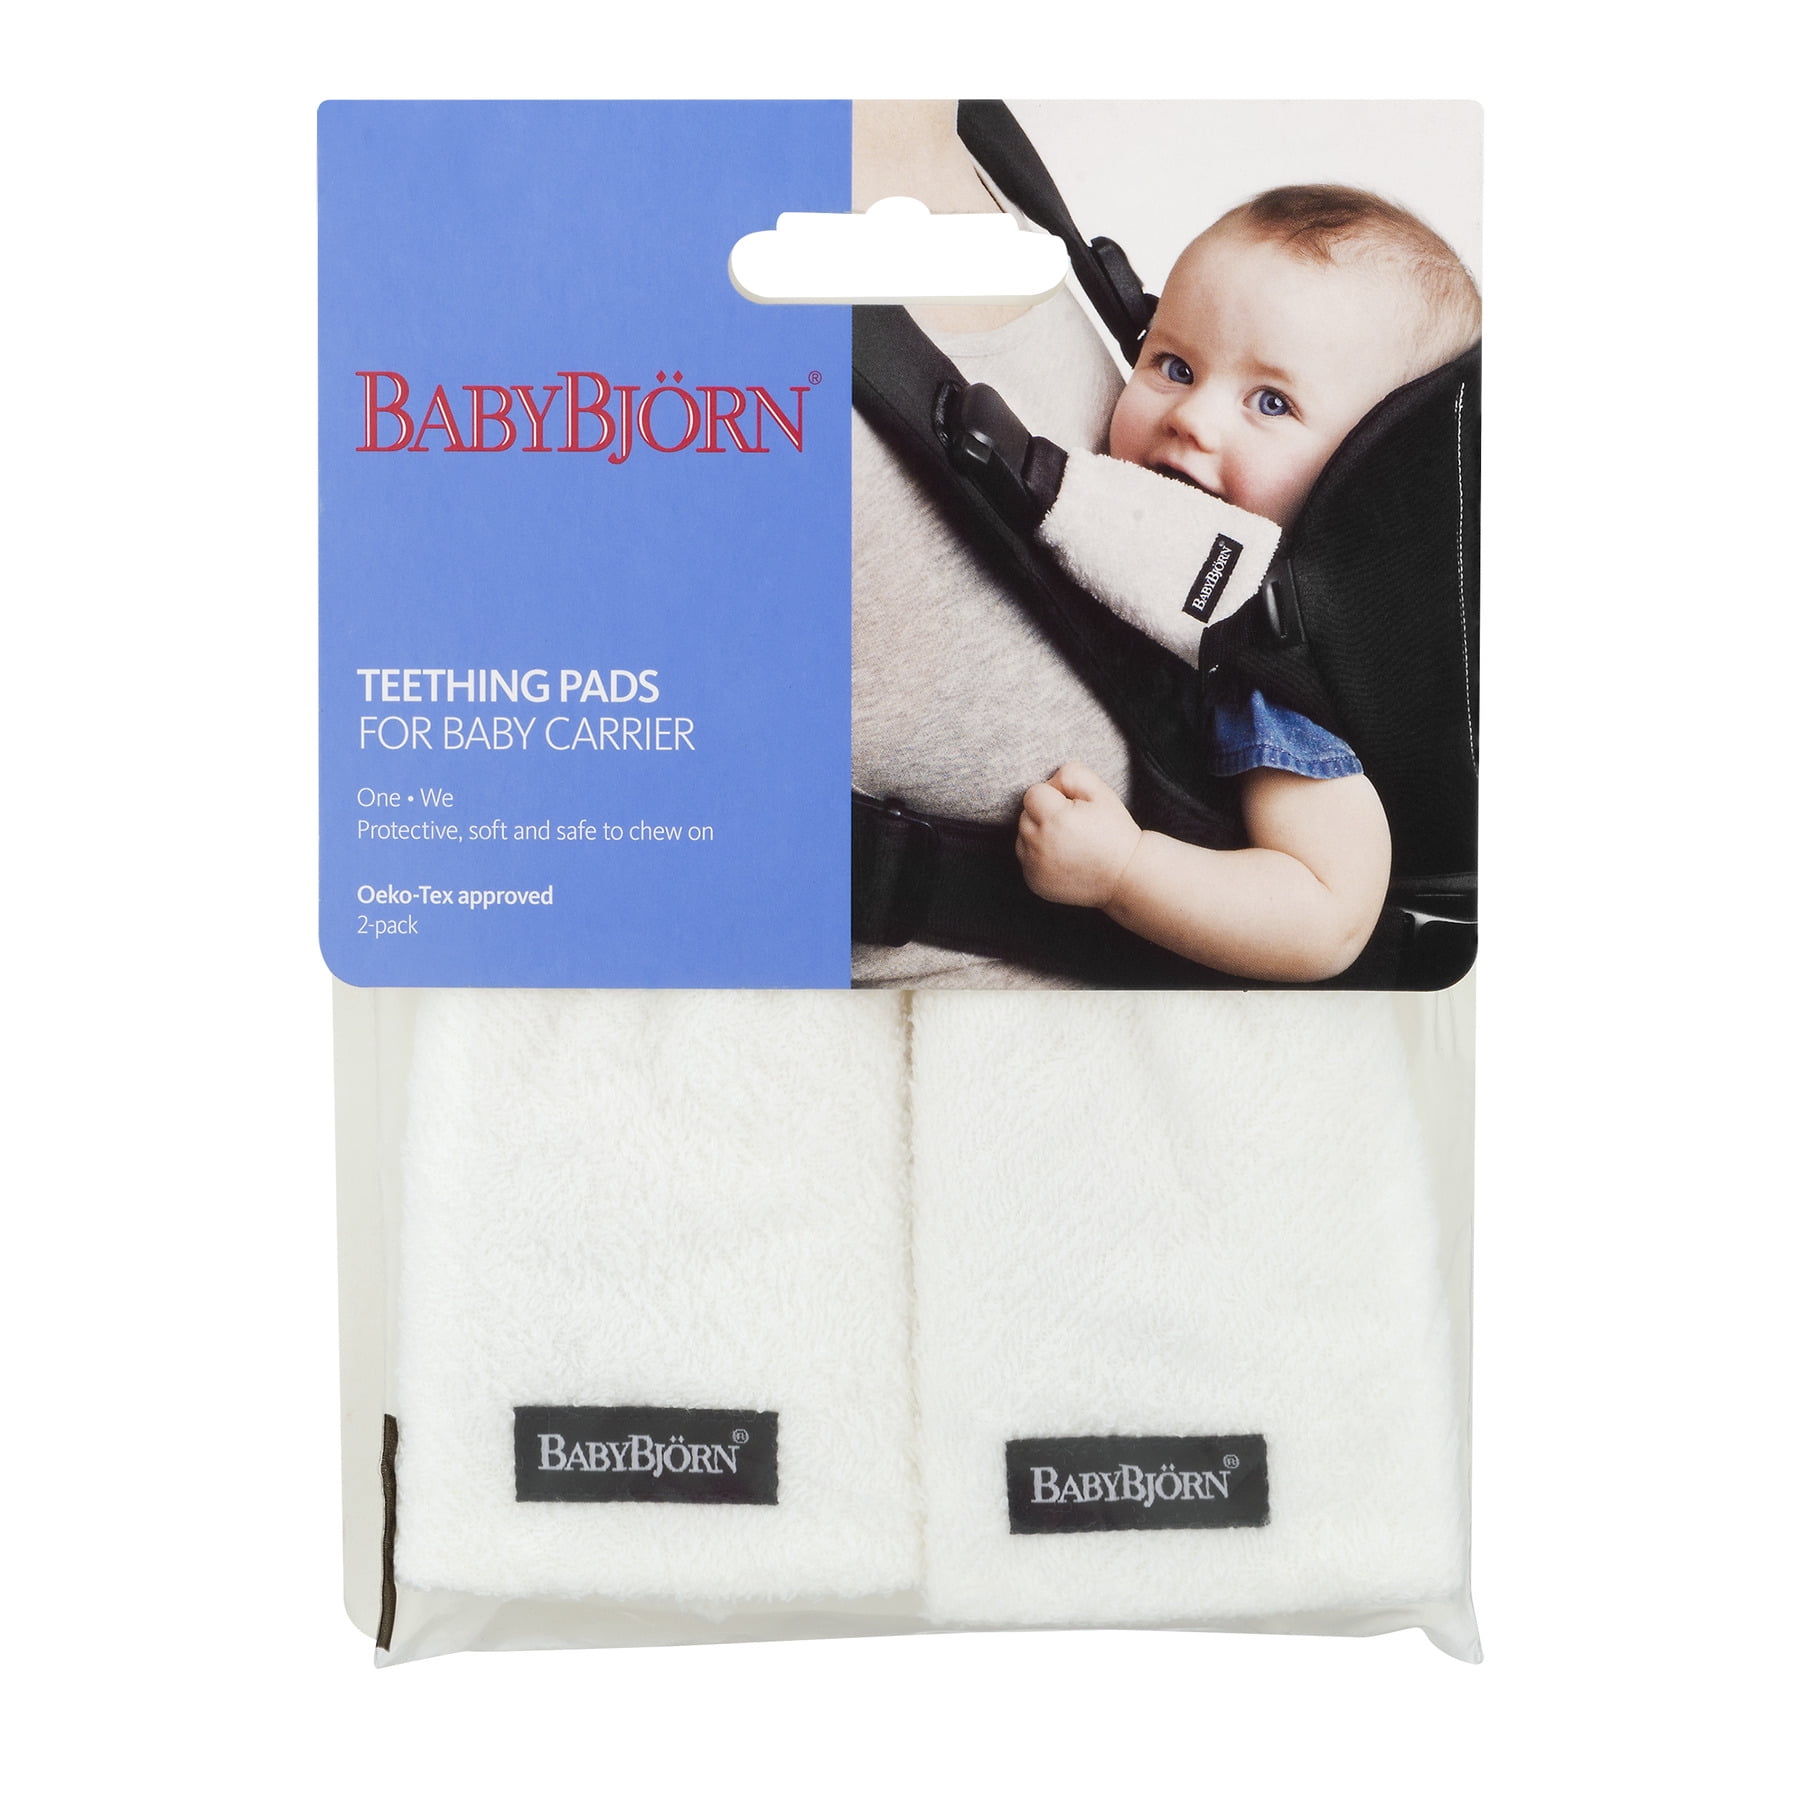 Babybjorn Teething Pads For Baby 